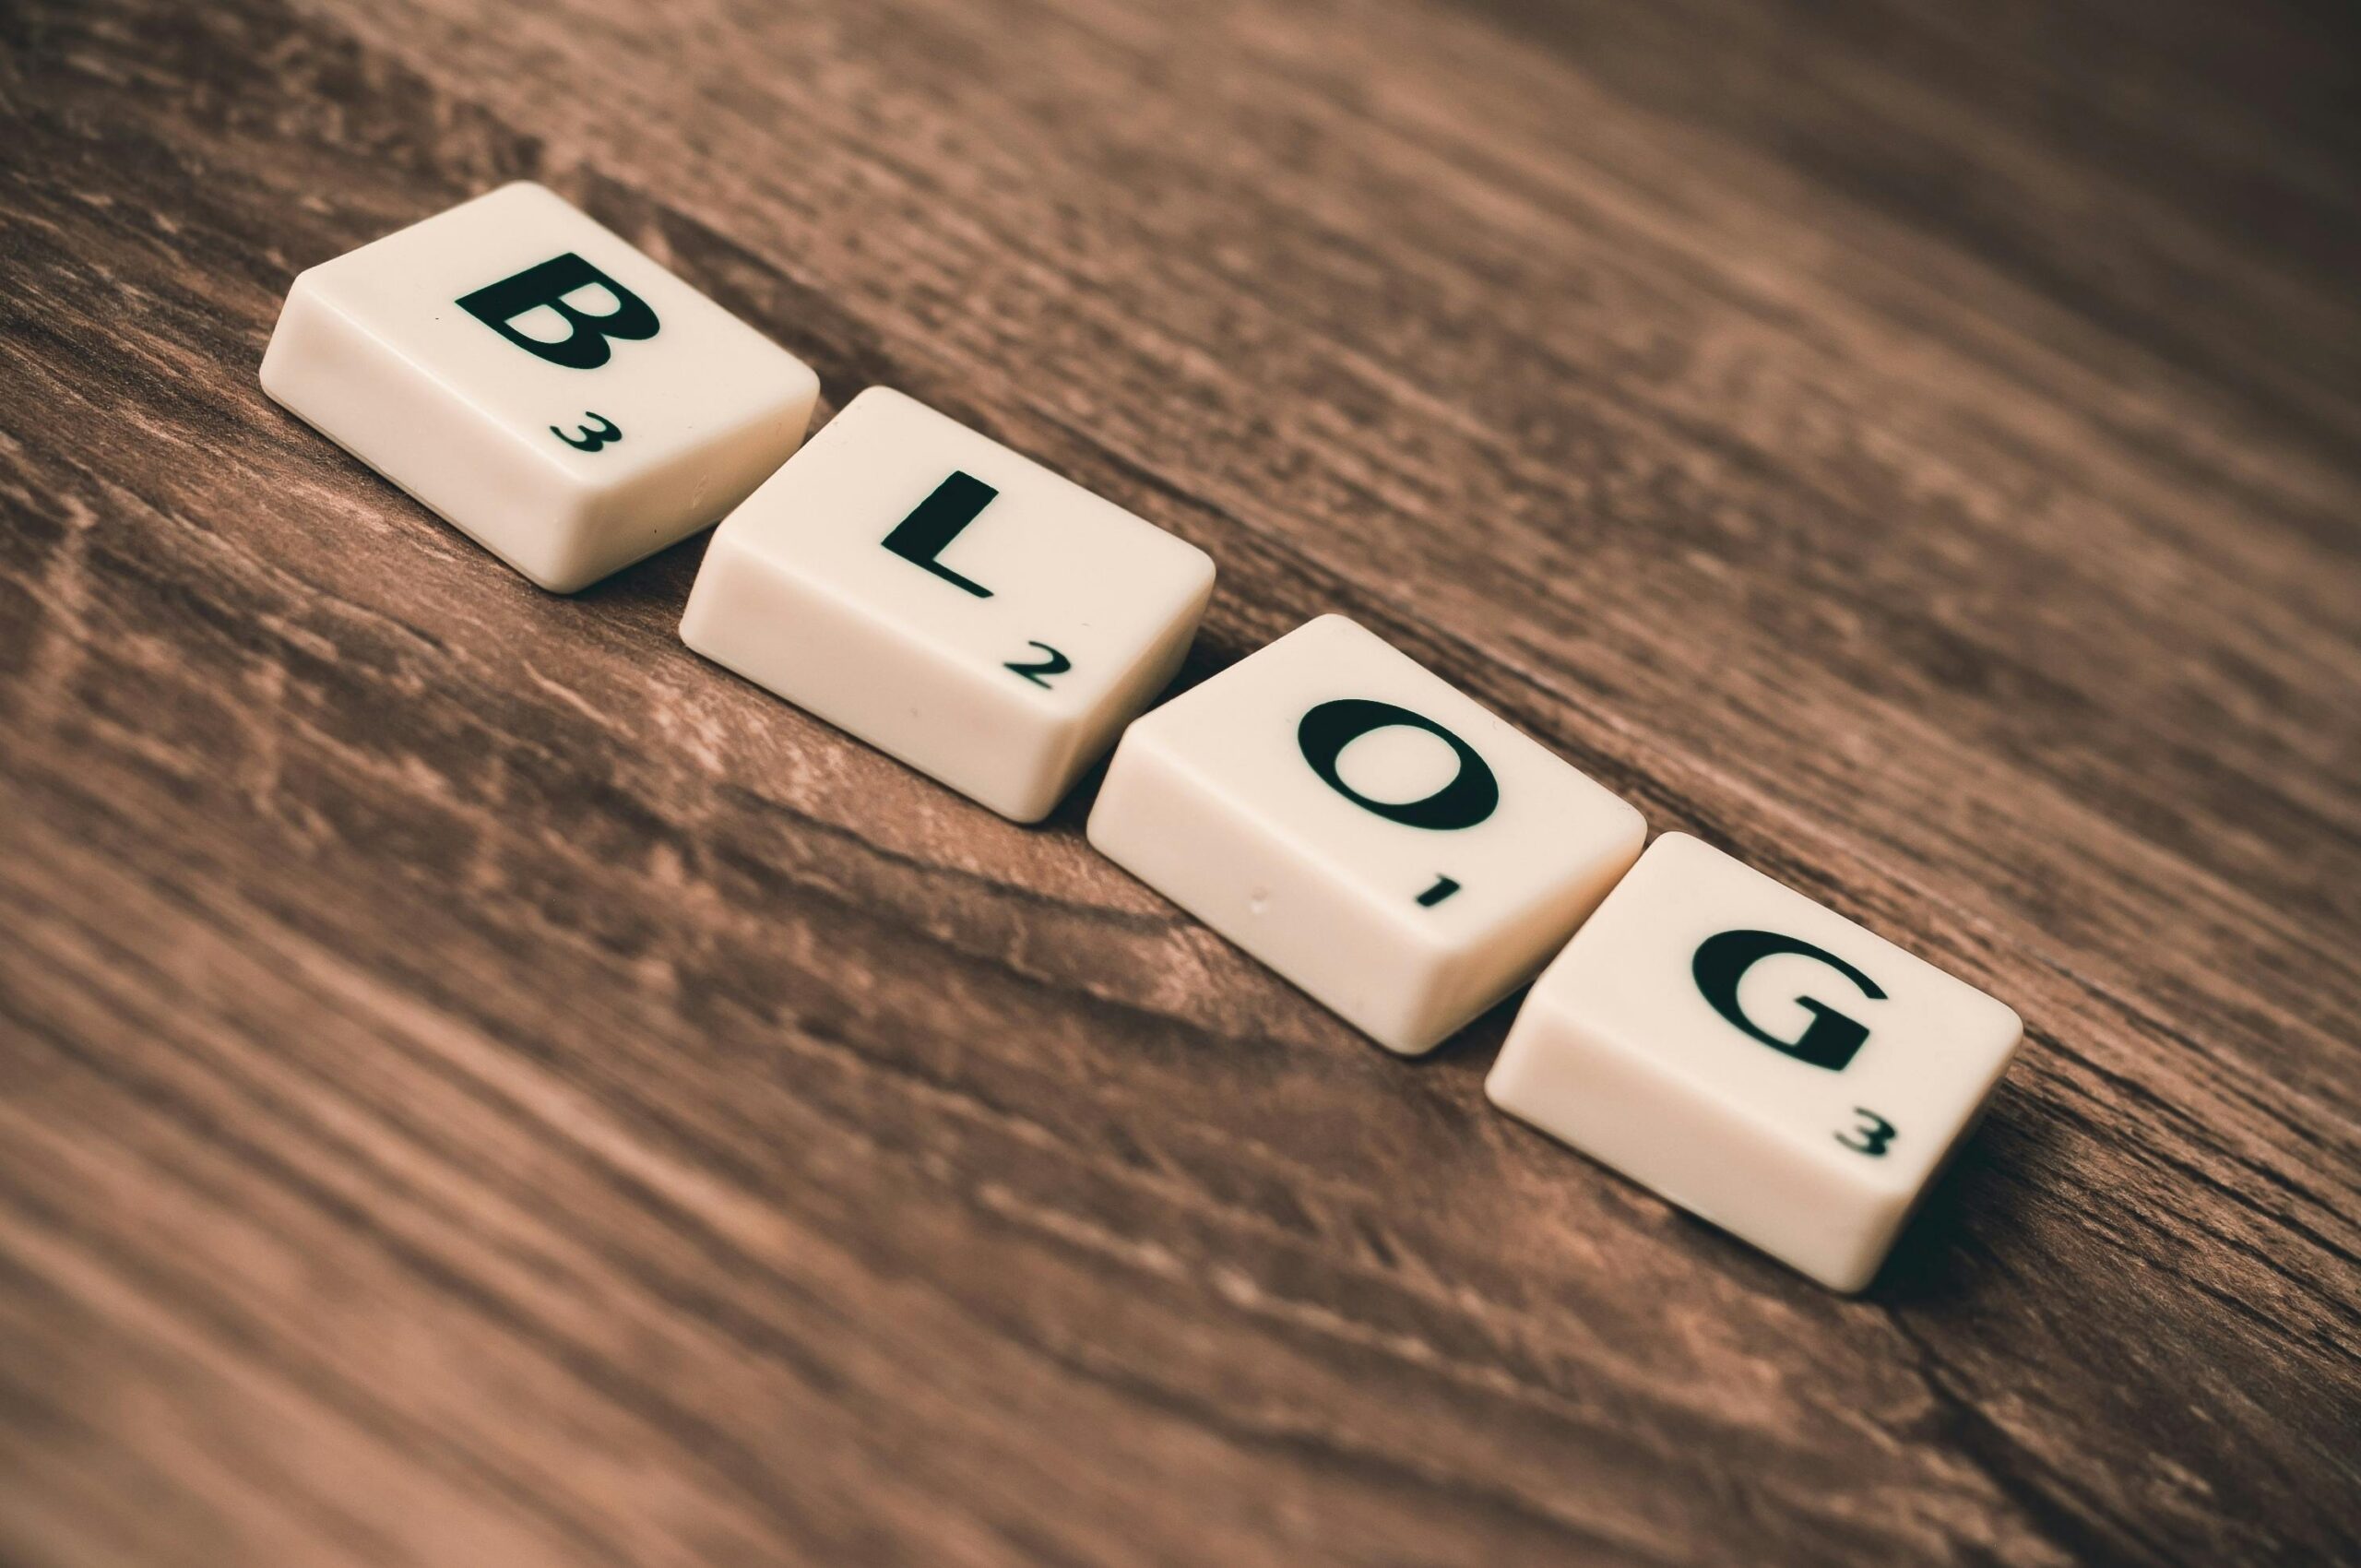 Blogging Blogging can be a rewarding way to make money online while sharing your expertise, interests, or creative writing. Here's how to get started with blogging: